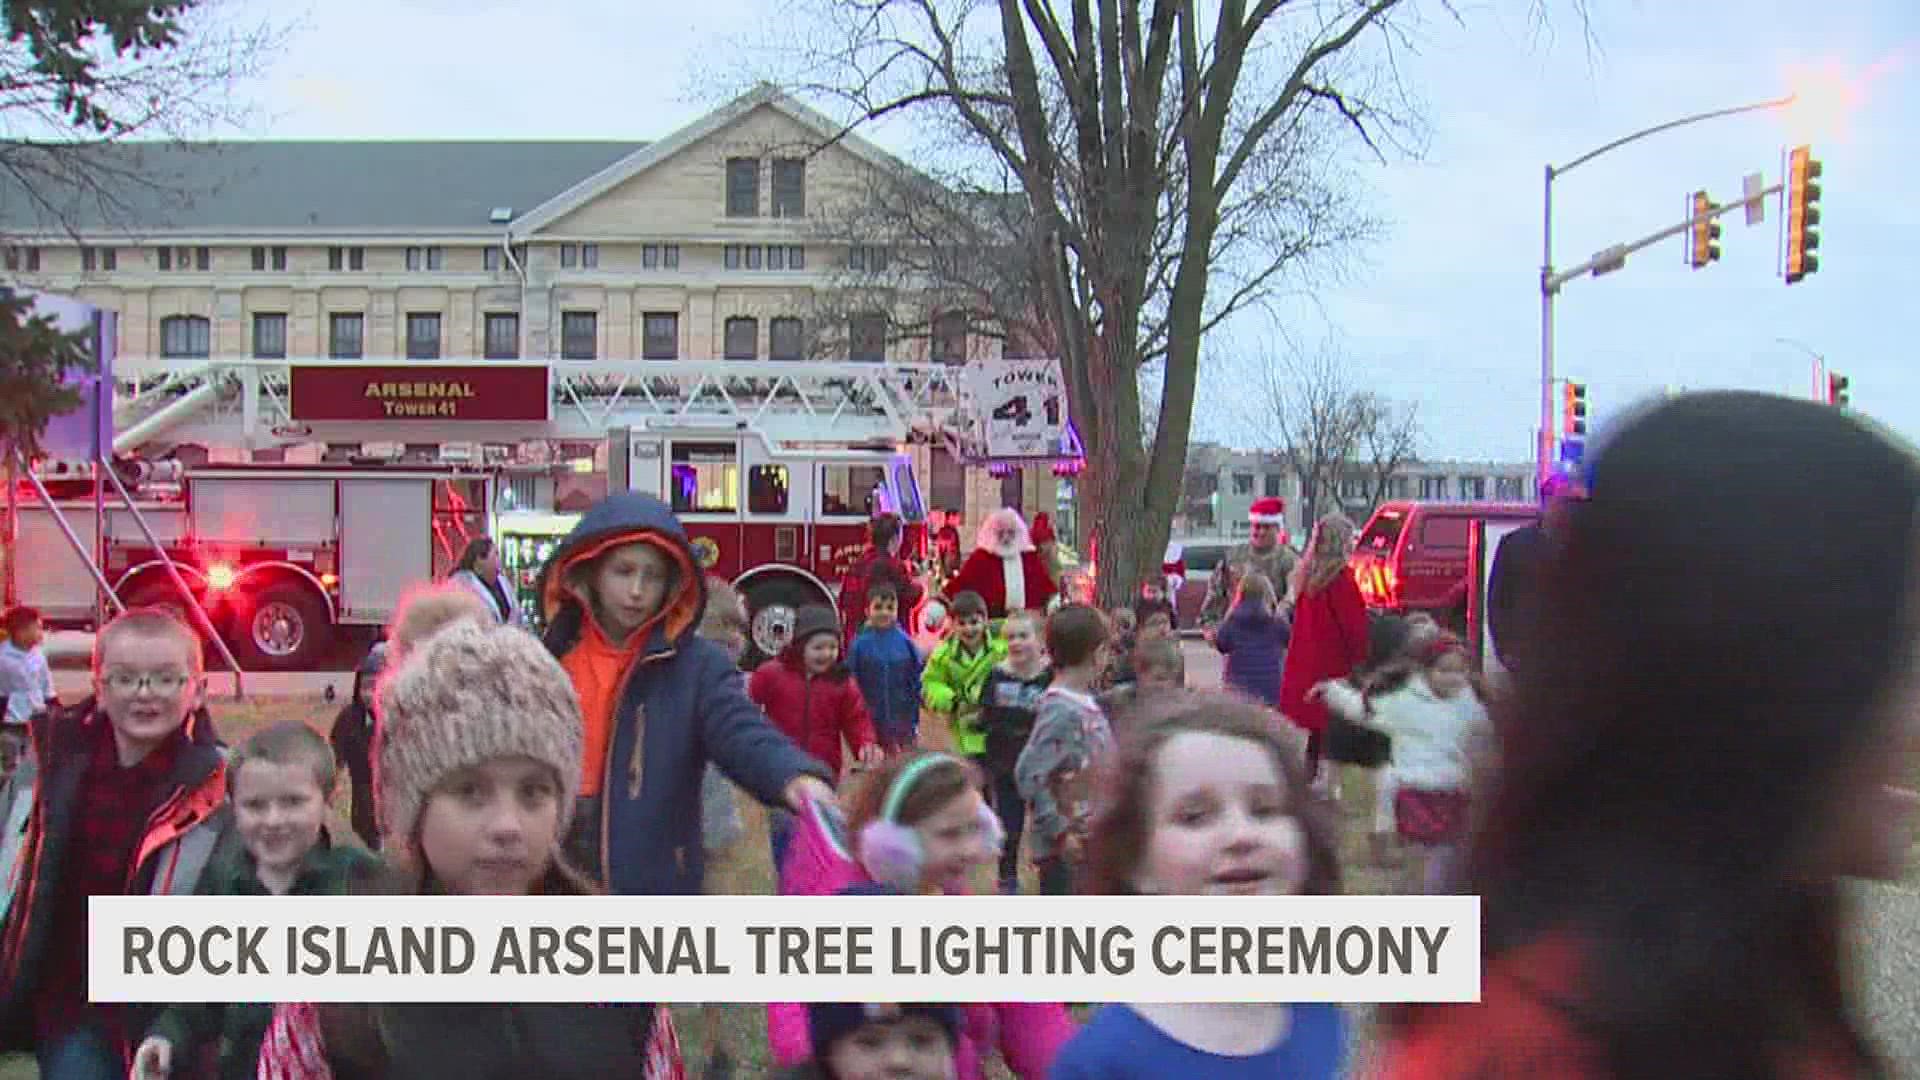 The Arsenal hosted its annual Garrison Tree Lighting on Friday, alongside events like a Santa visit, Toys for Tots collection, and live band.